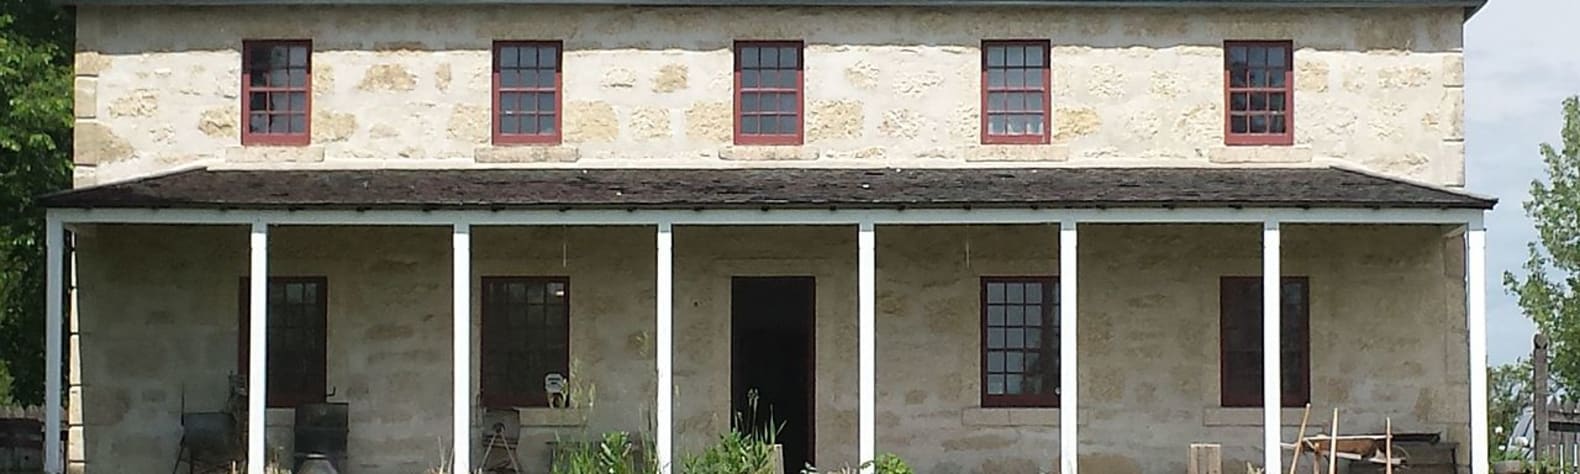 St. Andrew's Rectory National Historic Site